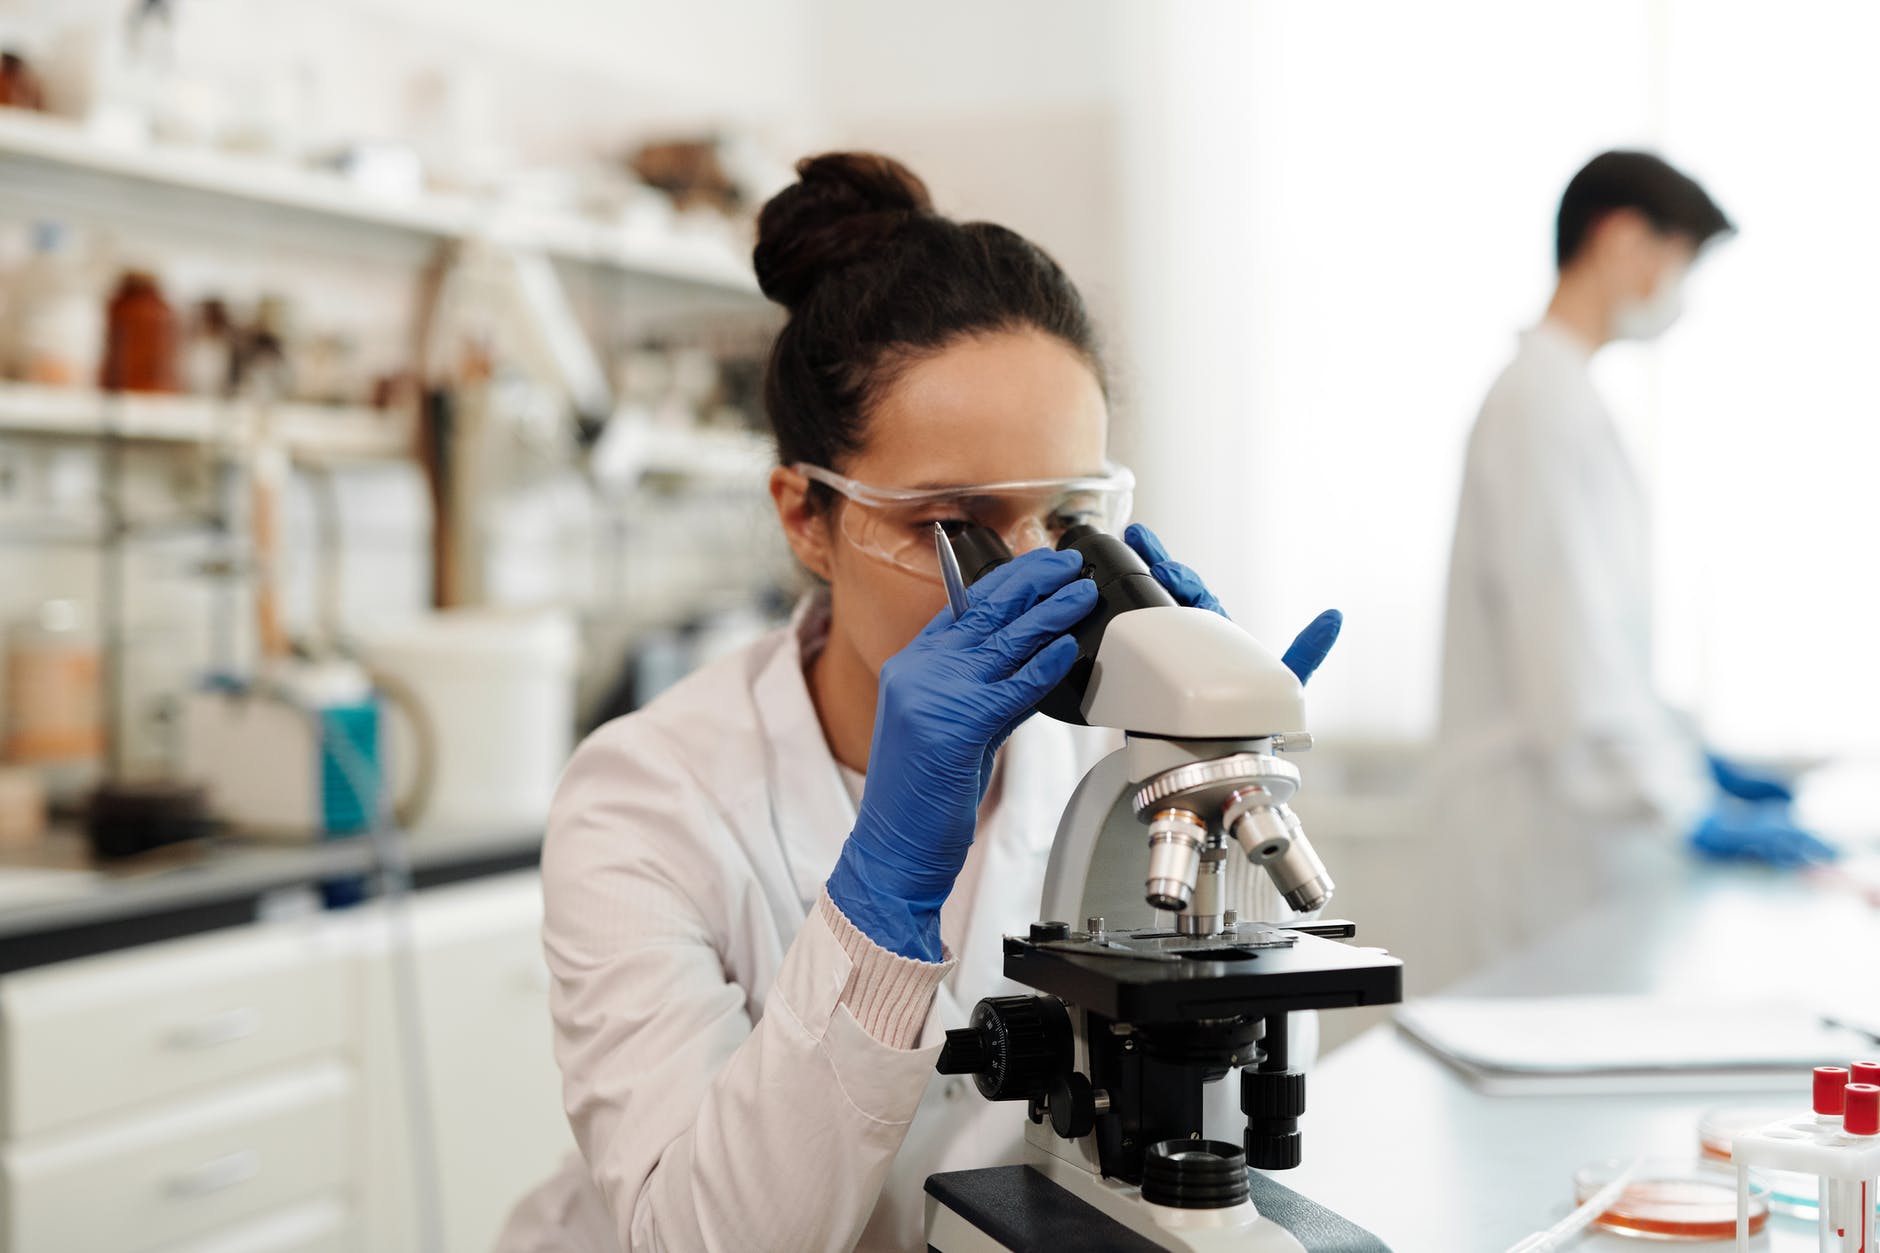 Laboratory technician carrying out tests | Photo: Pexels